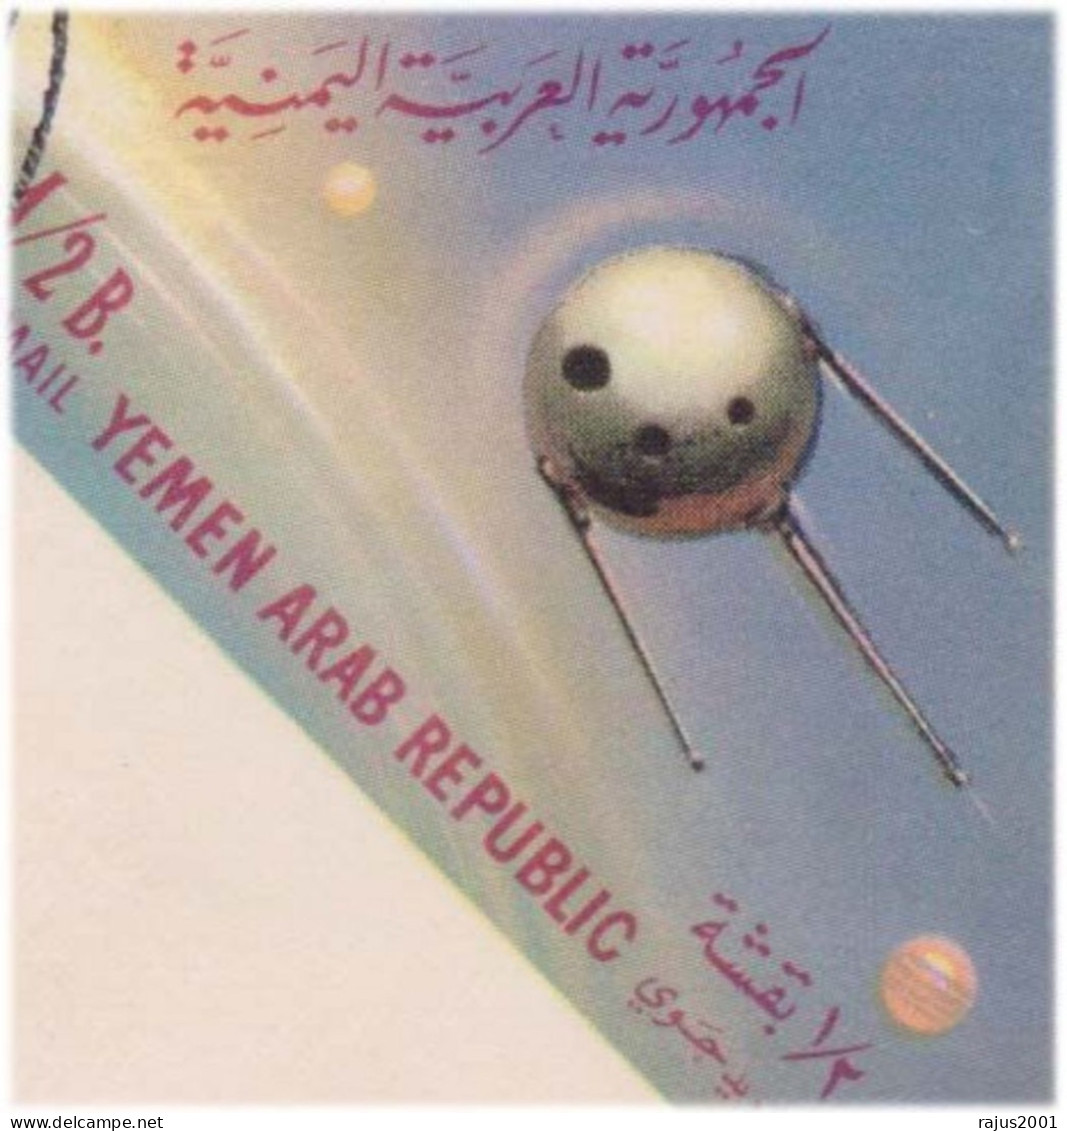 Honouring Astronauts, Exploration, SPUTNIK World First Man Made Space Satellite, Science, Astronomy IMPERF YEMEN FDC - Astronomy